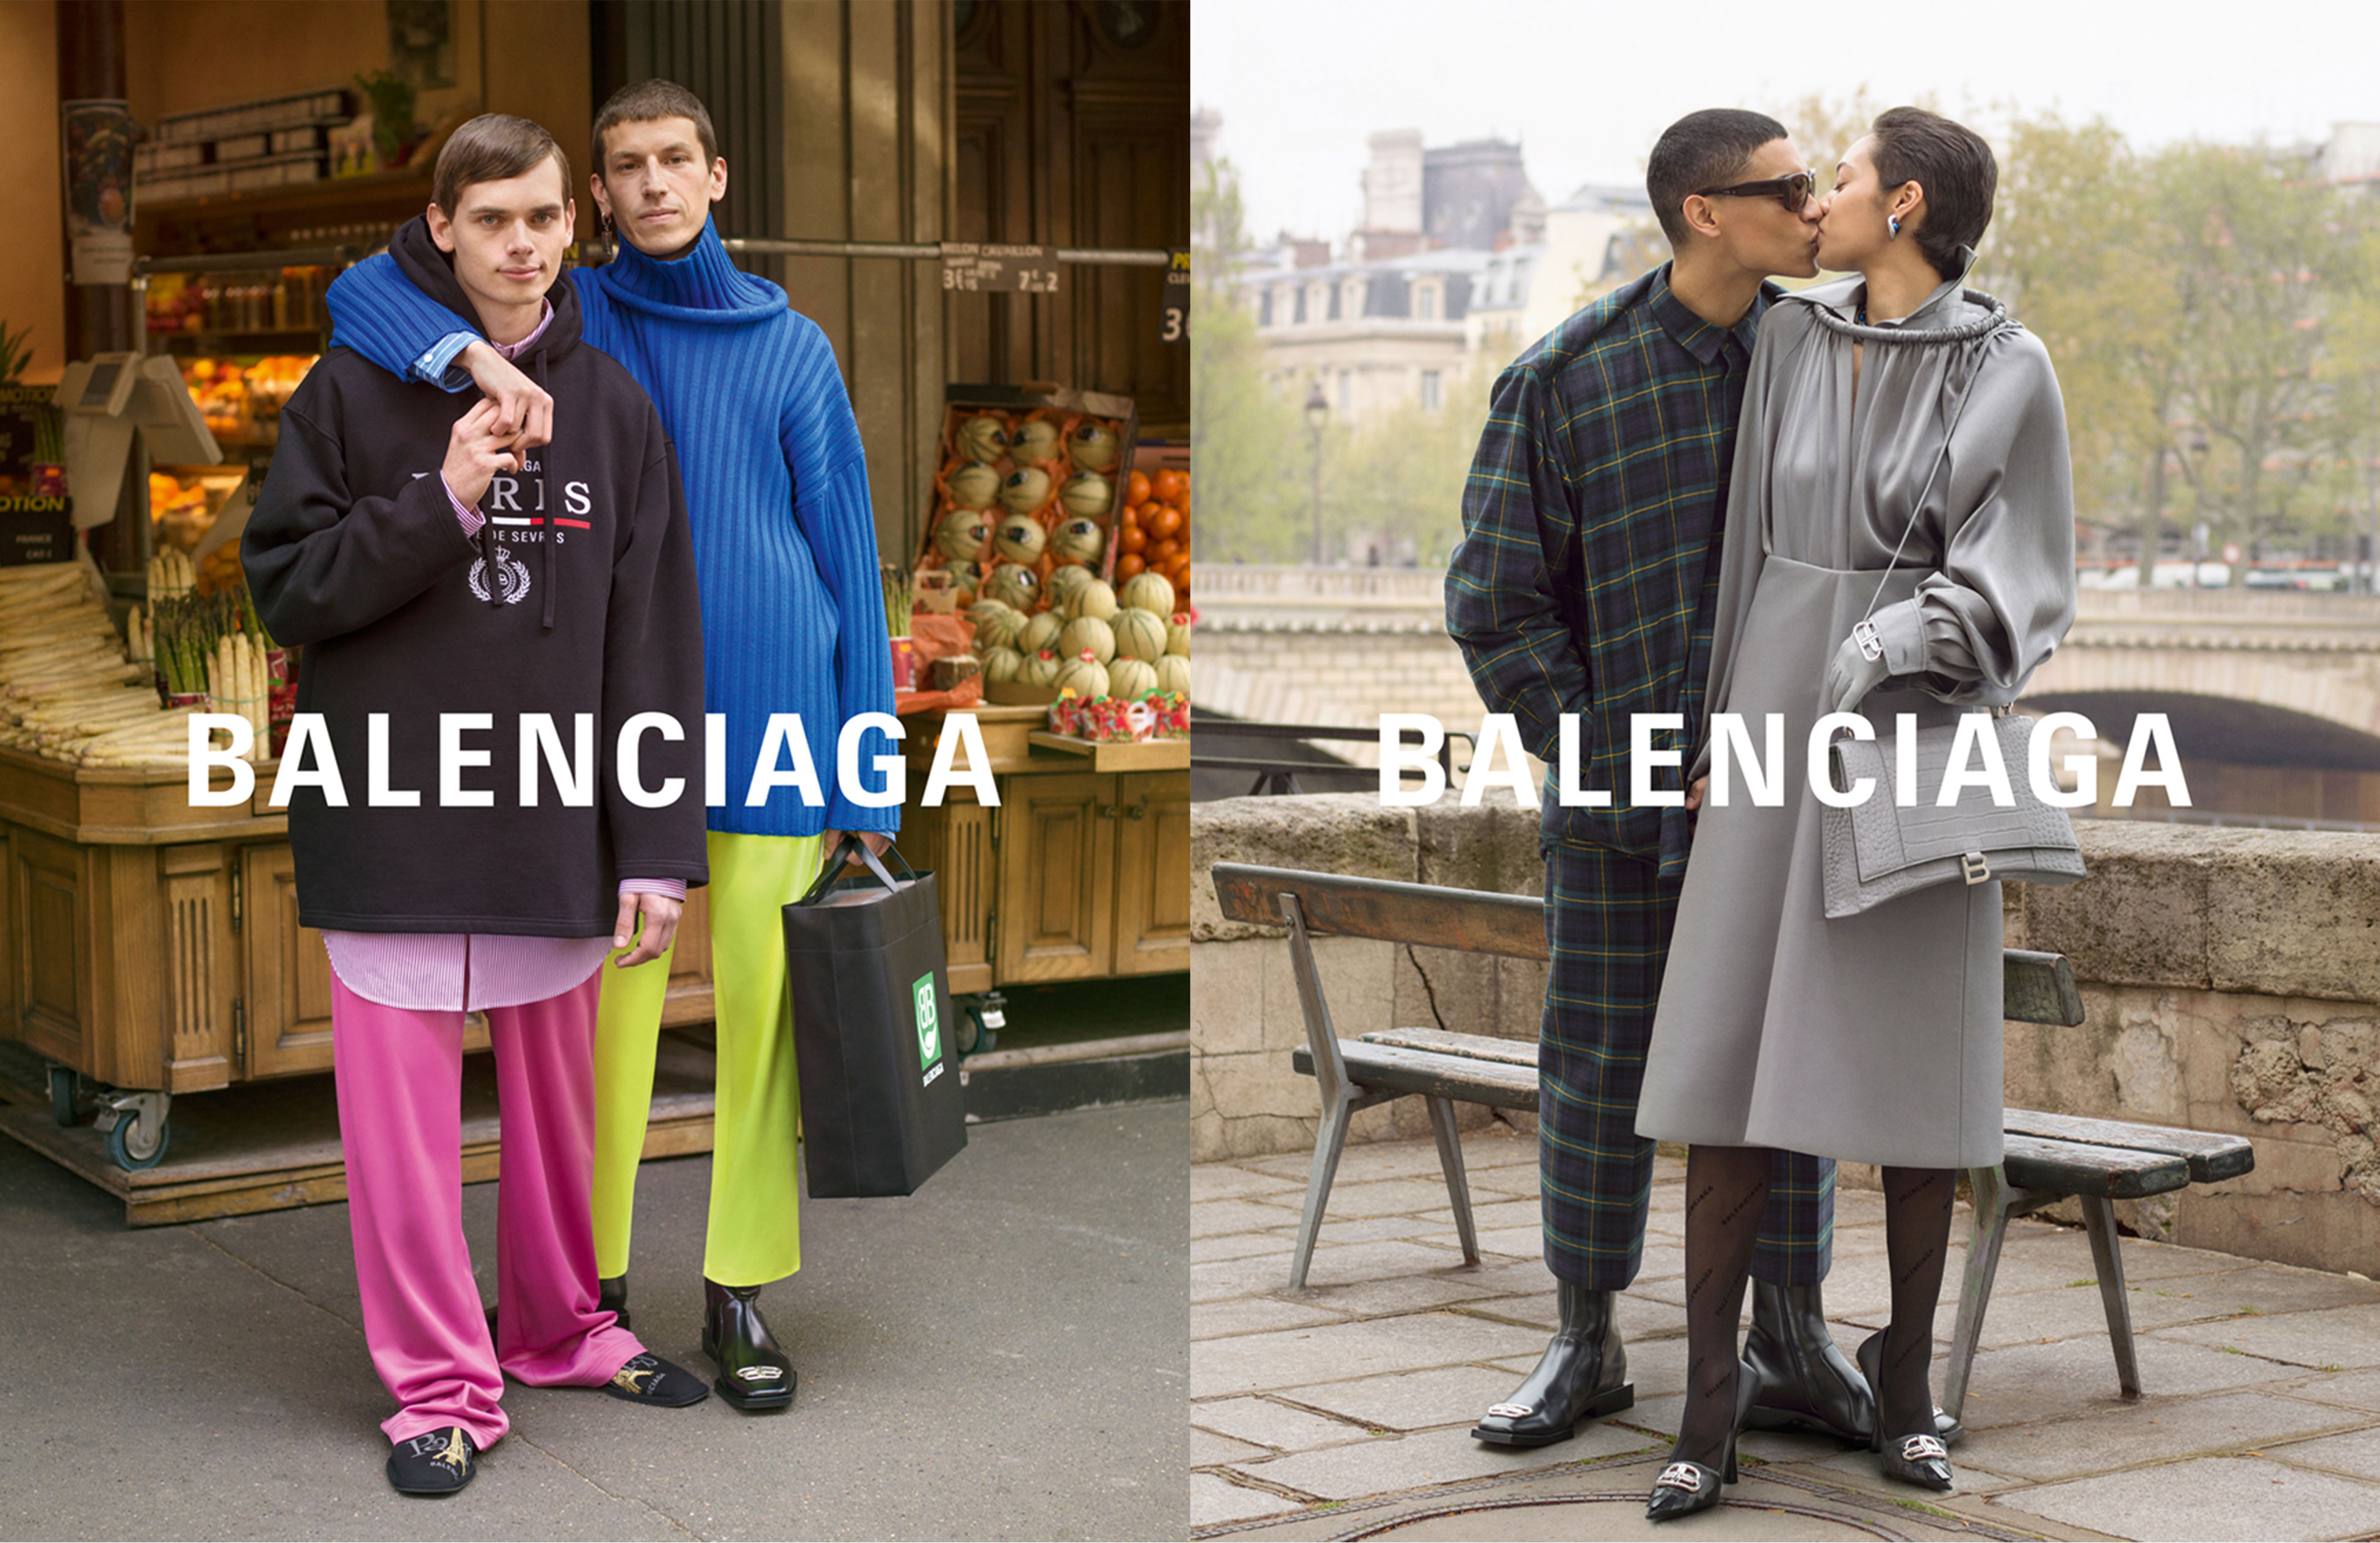 Balenciaga apologise for adverts featuring child abuse references